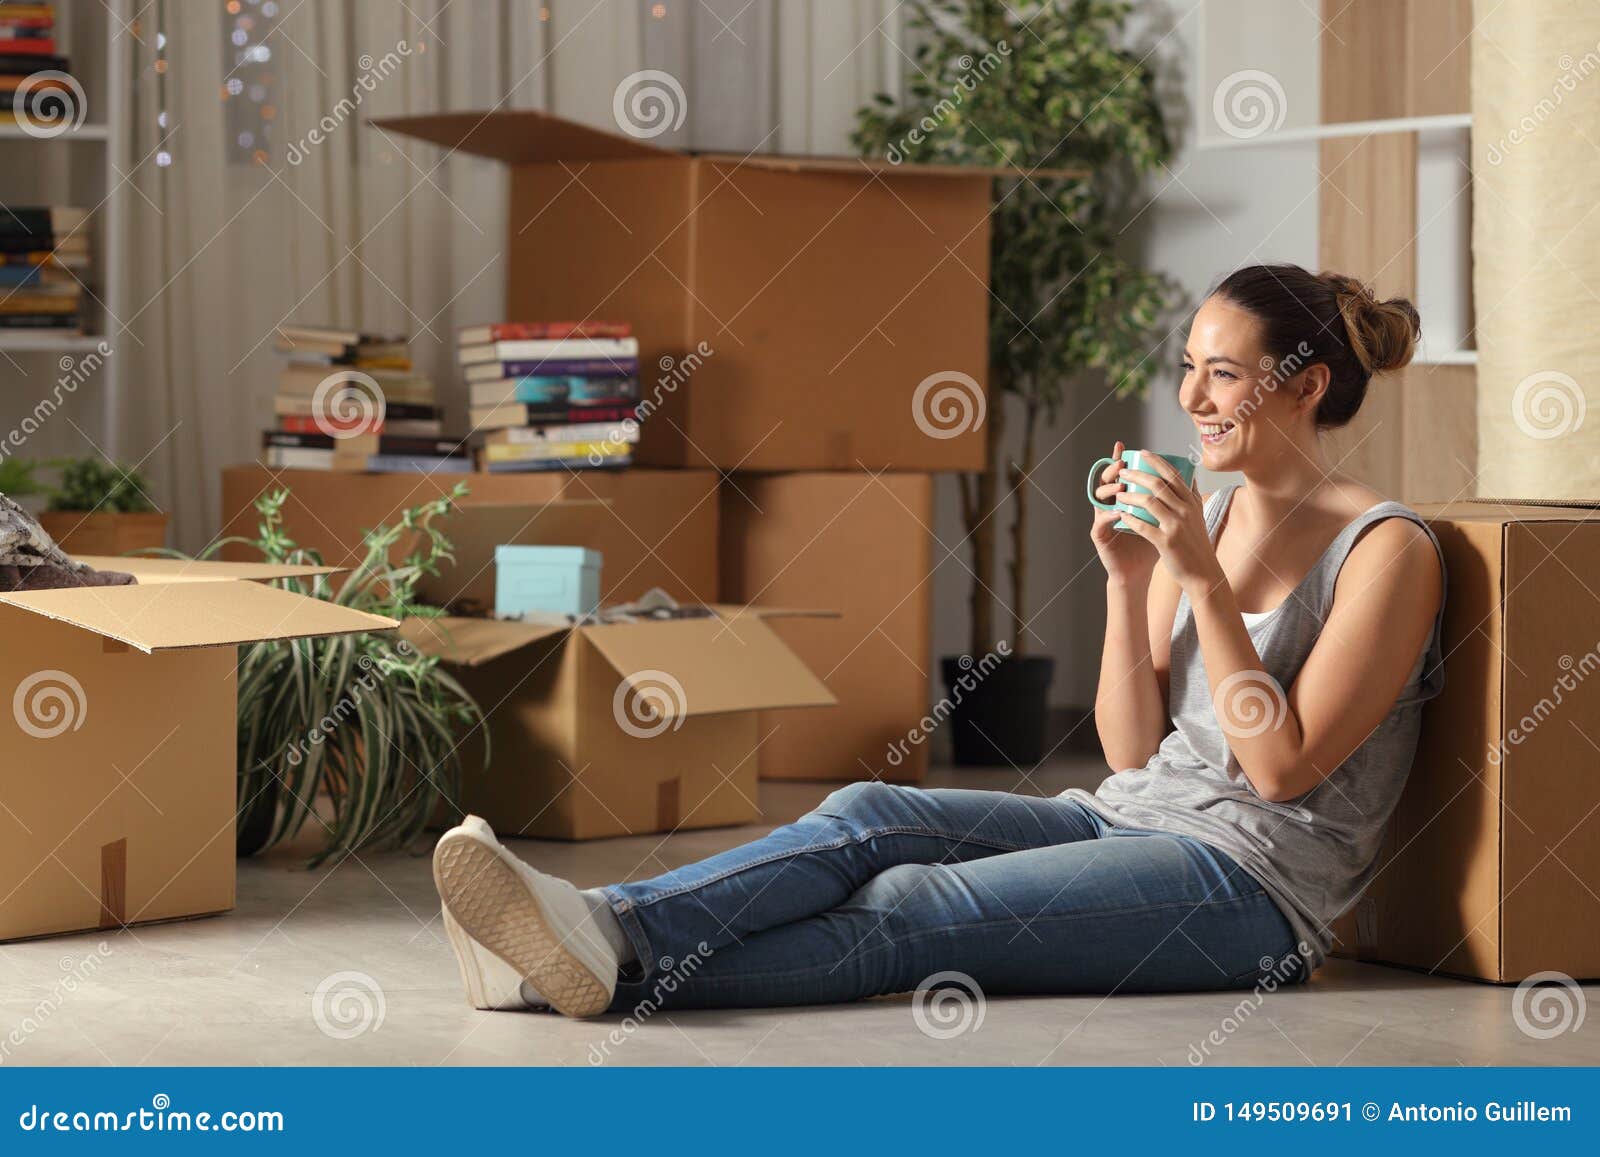 happy tenant resting drinking coffee moving home